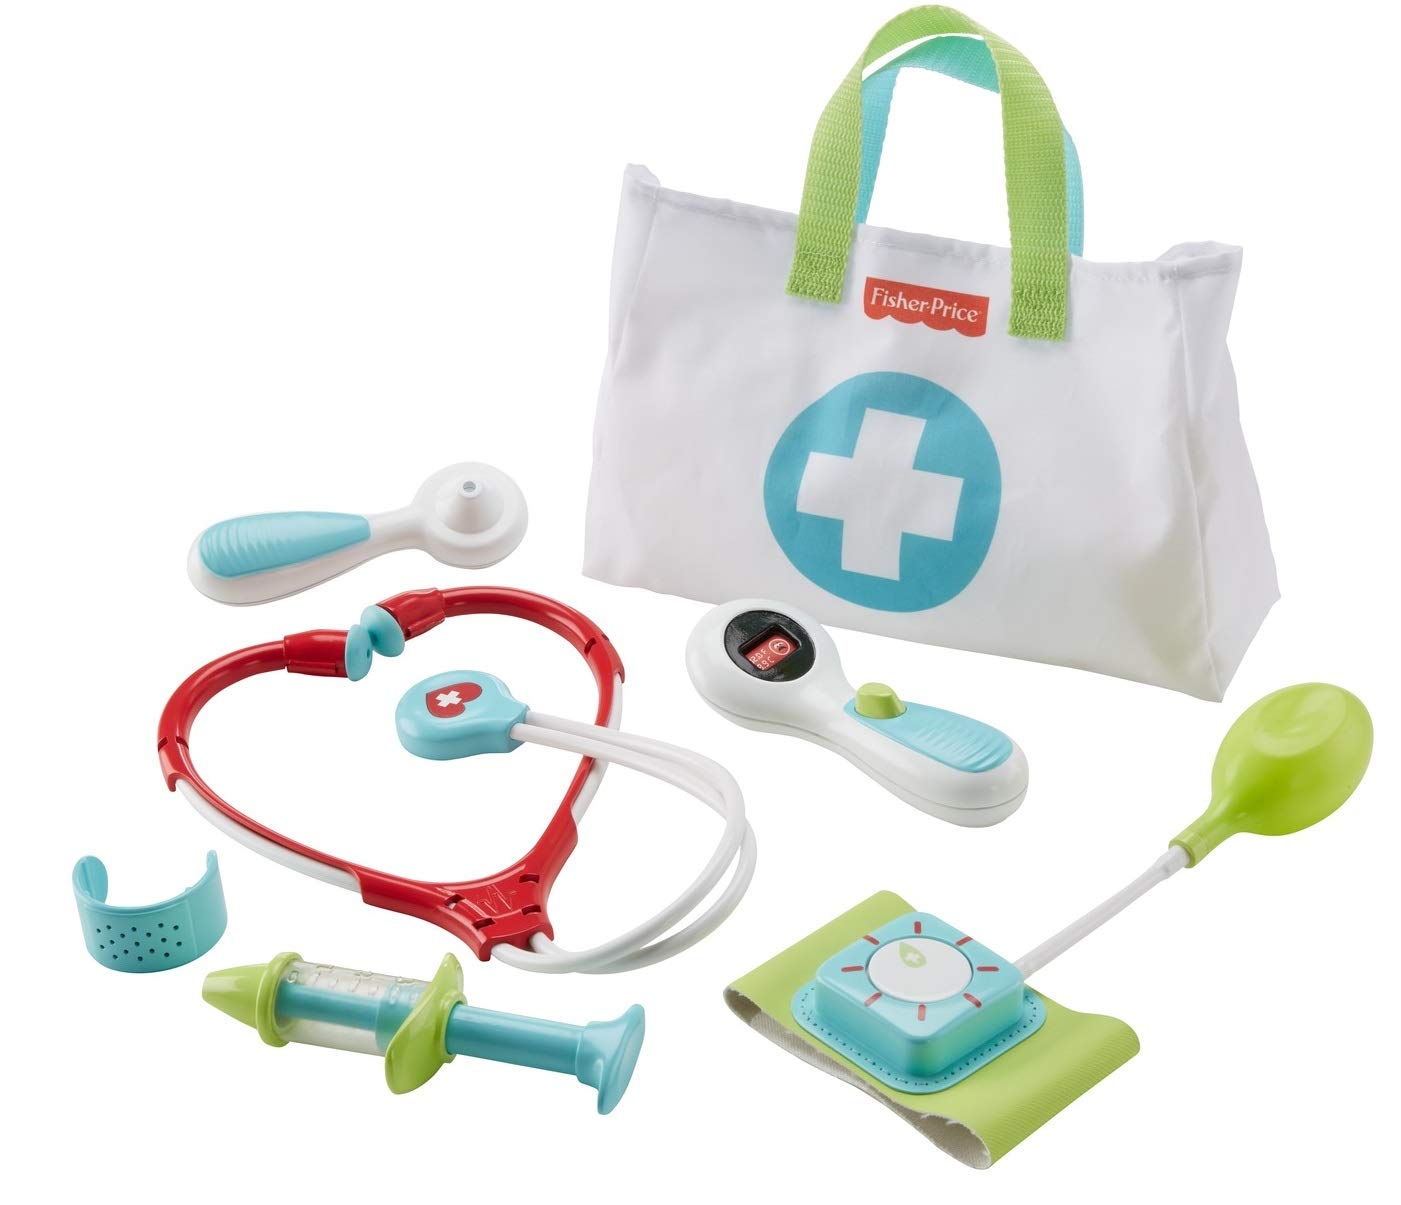 Fisher Price Fisher-Price DVH14 Doctor's Bag 7-Piece Role Play Doctor's Case 3 Years +